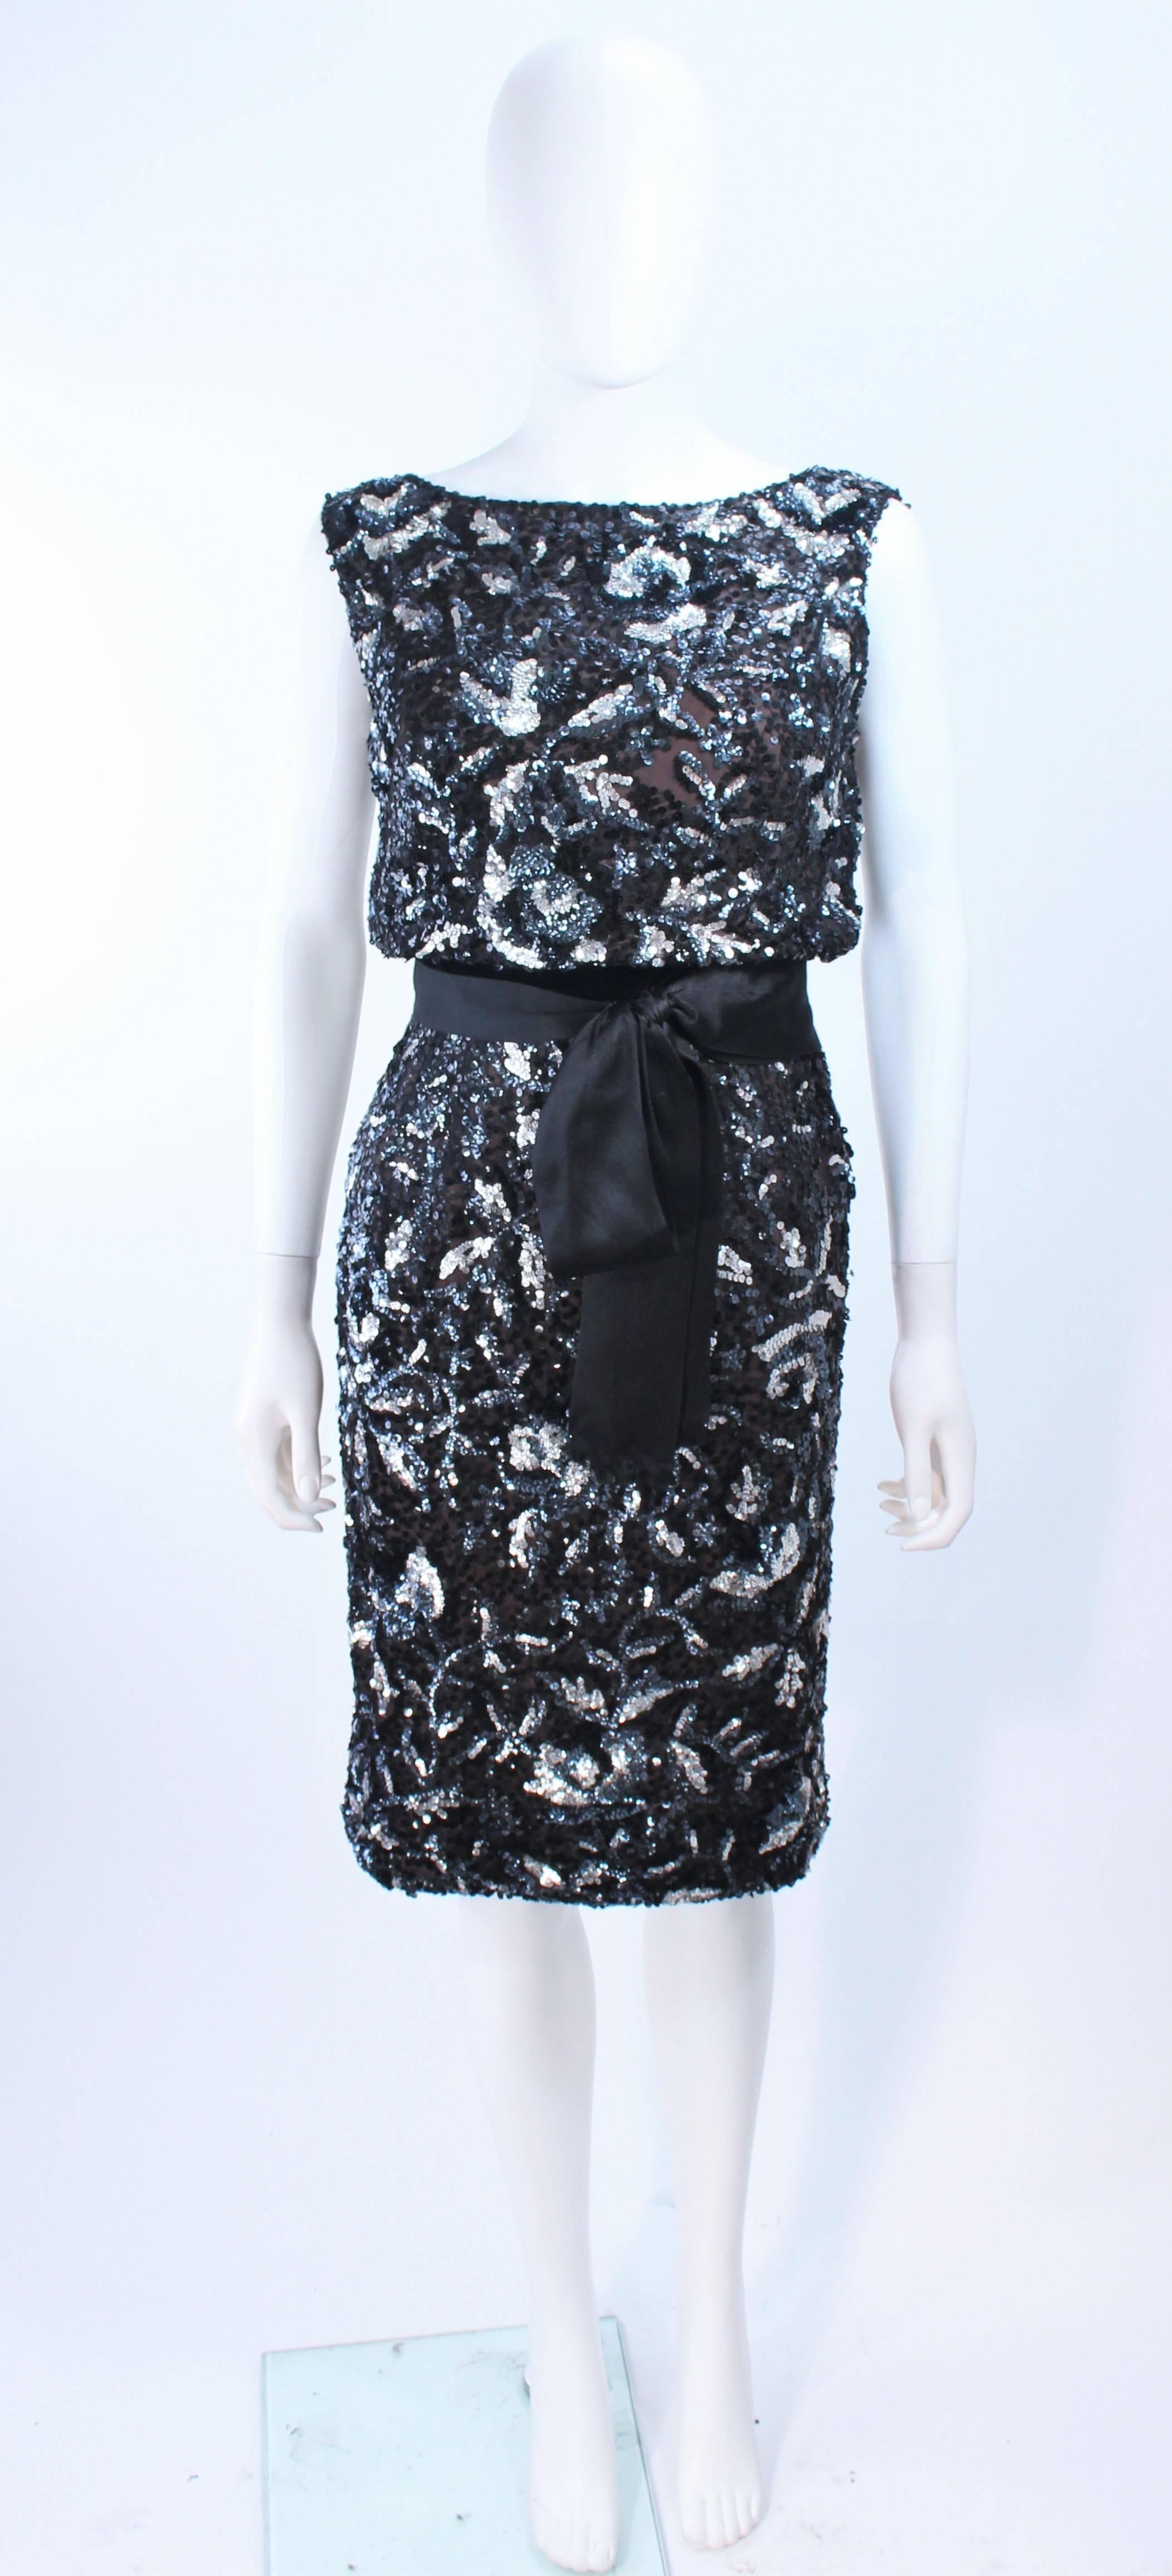 This vintage cocktail dress is composed of a silk chiffon with a sequin floral applique in silver and black hues. There is a side zipper closure with hook and eyes. In excellent vintage condition.

**Please cross-reference measurements for